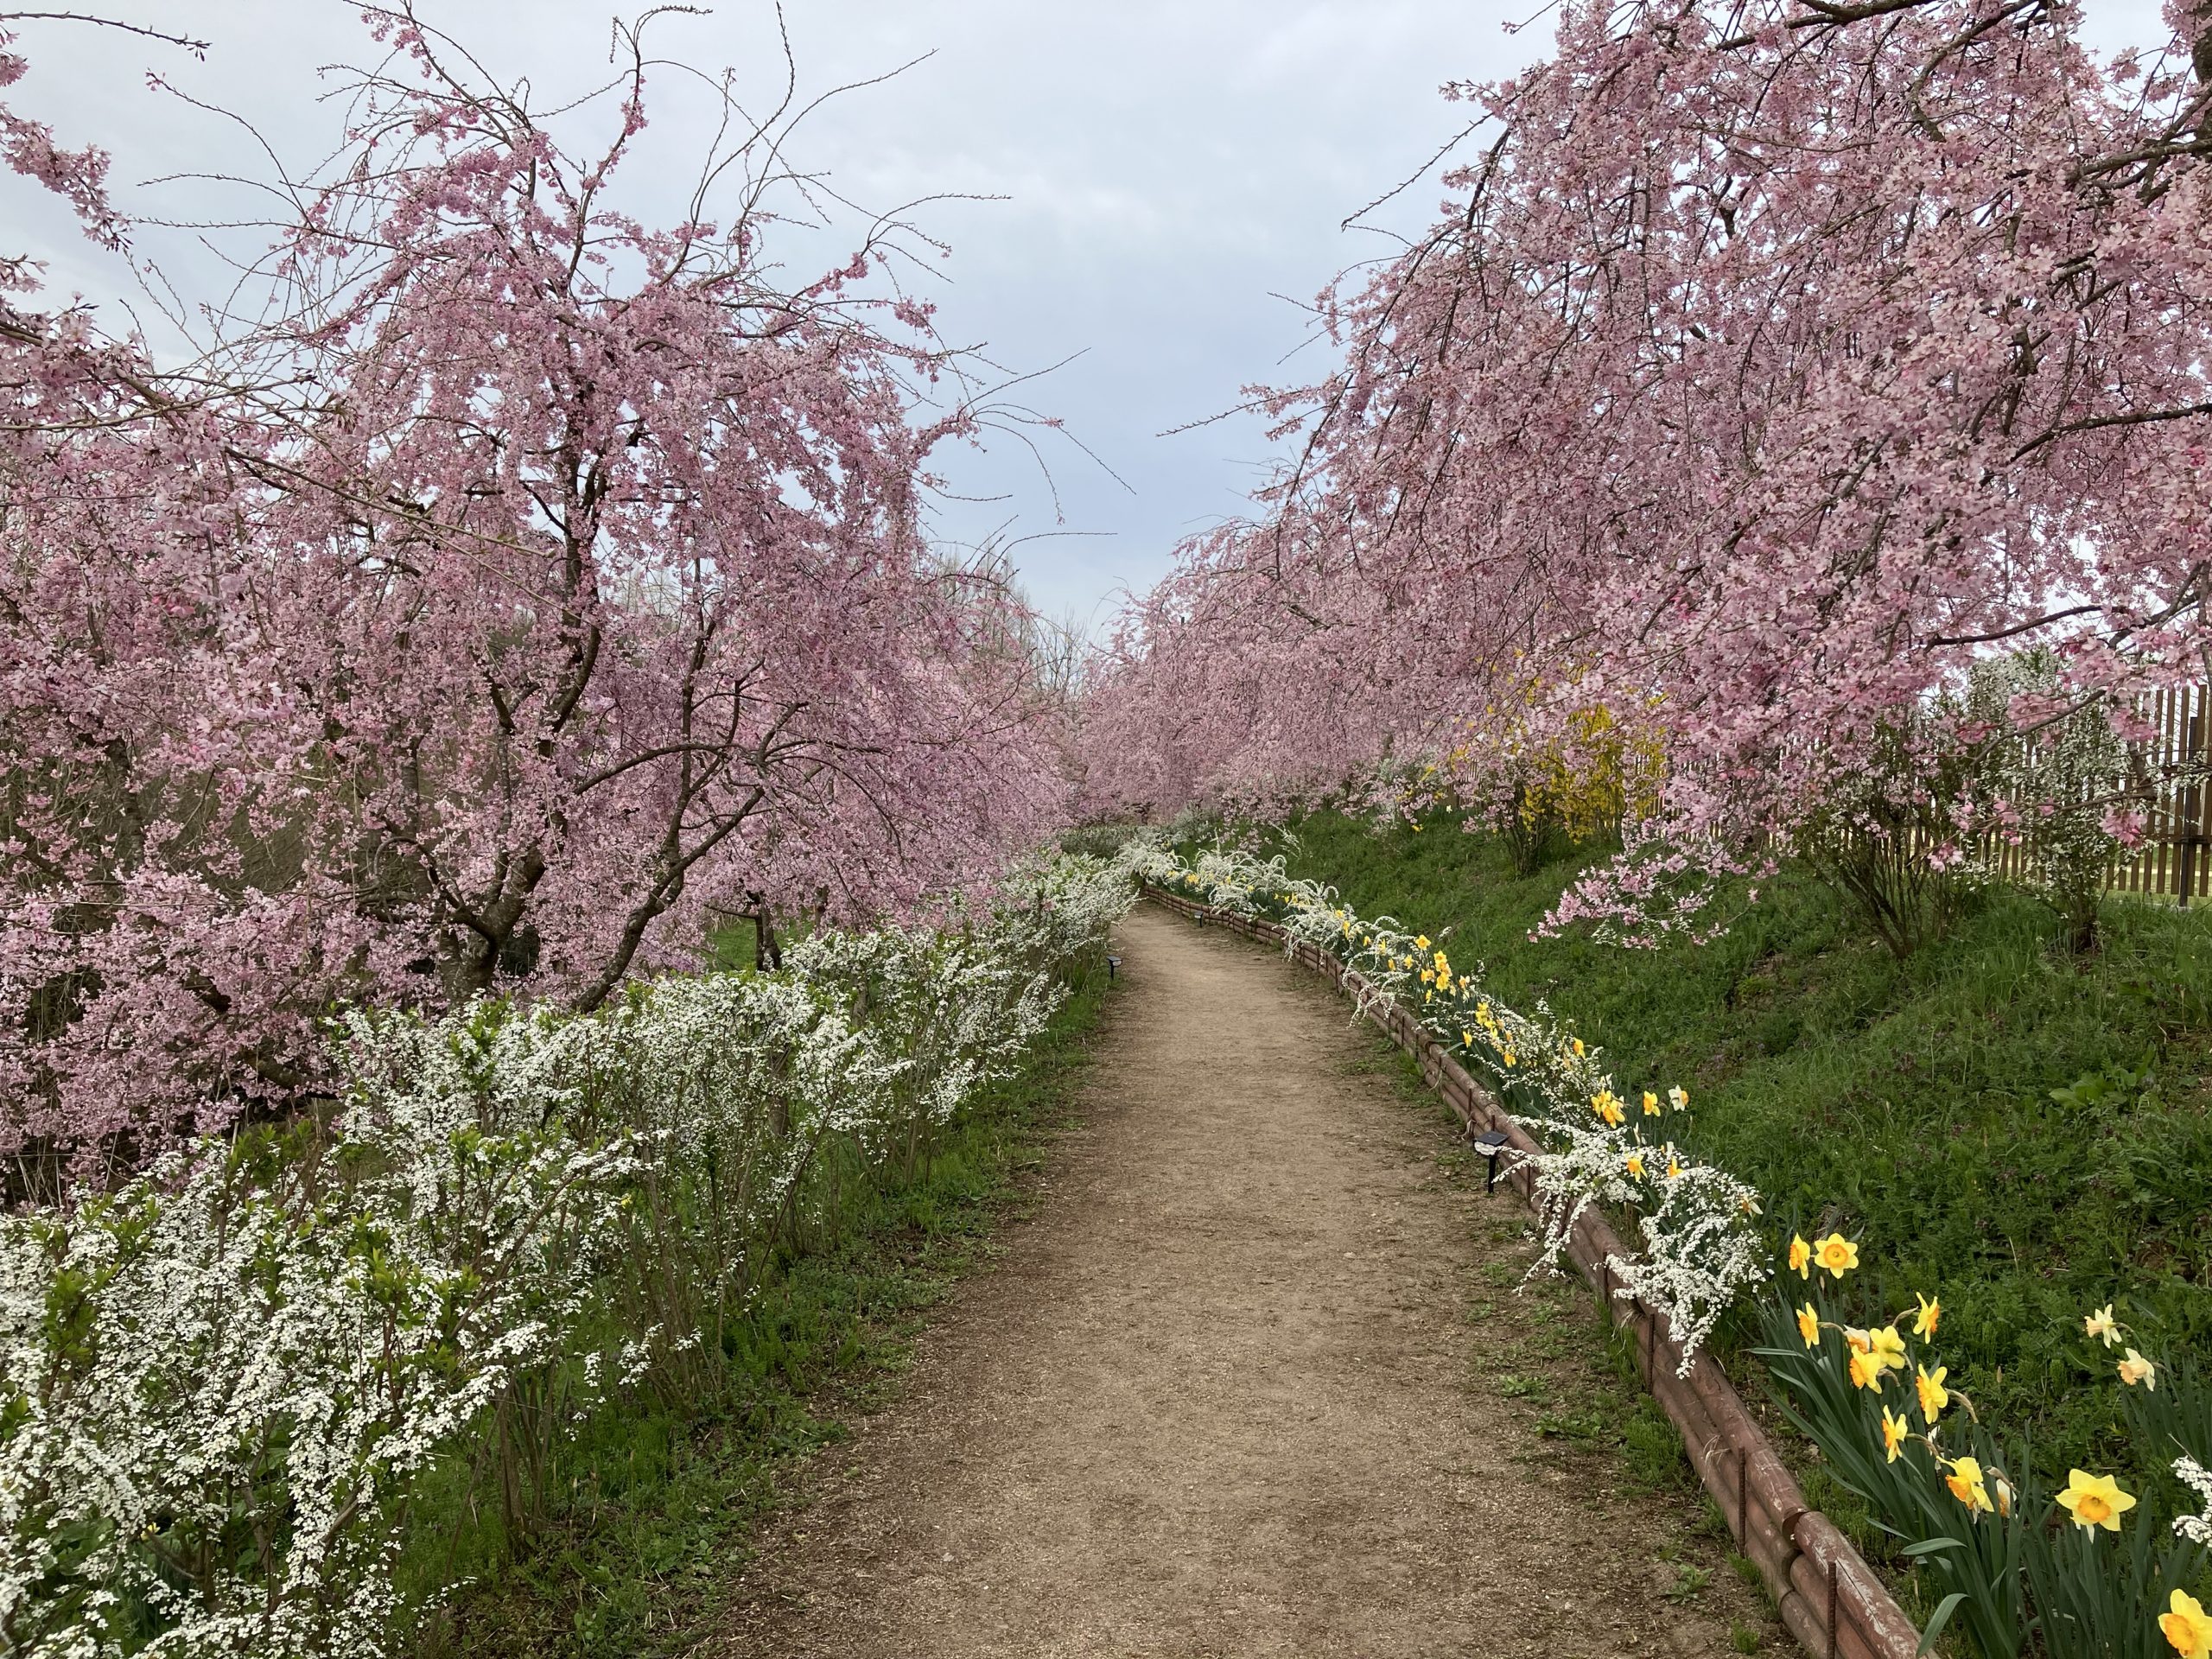 【Park open】Weeping cherry blossom【Best time to see】Rape blossoms【Best time to see】